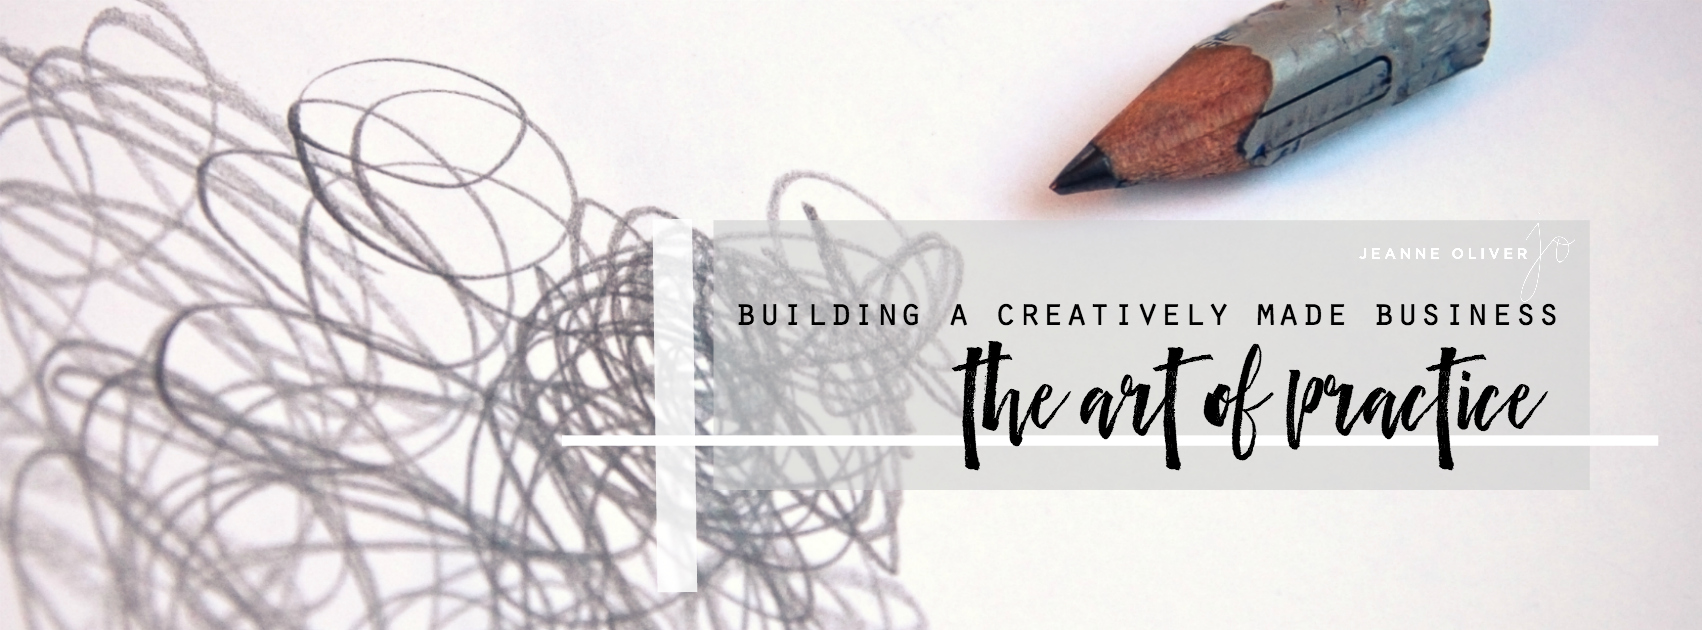 Building a Creatively Made Business | The Art of Practice